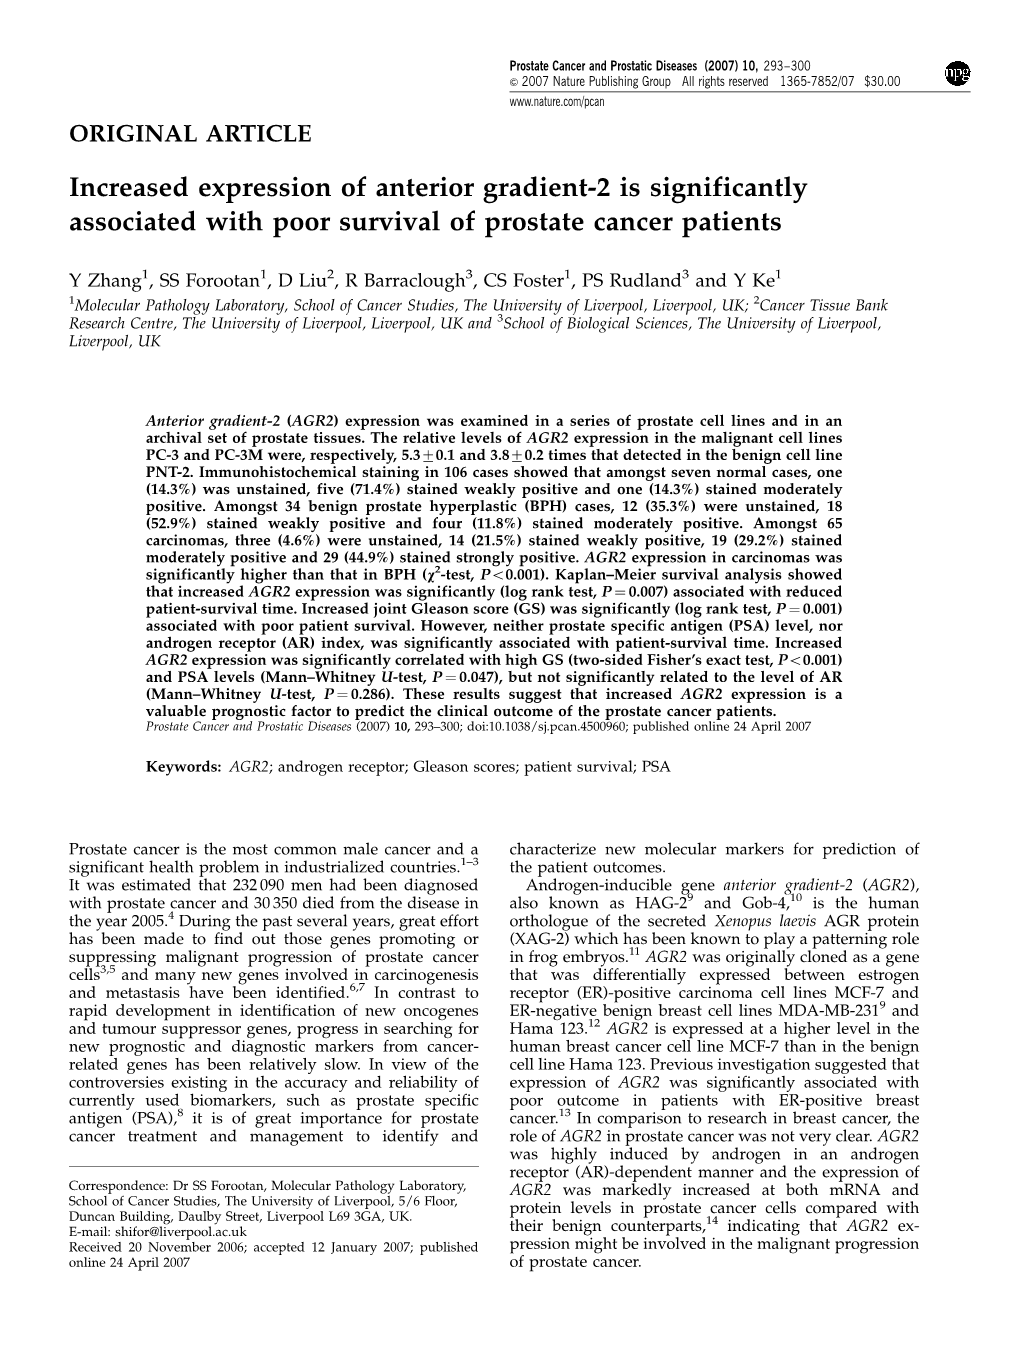 Increased Expression of Anterior Gradient-2 Is Significantly Associated with Poor Survival of Prostate Cancer Patients